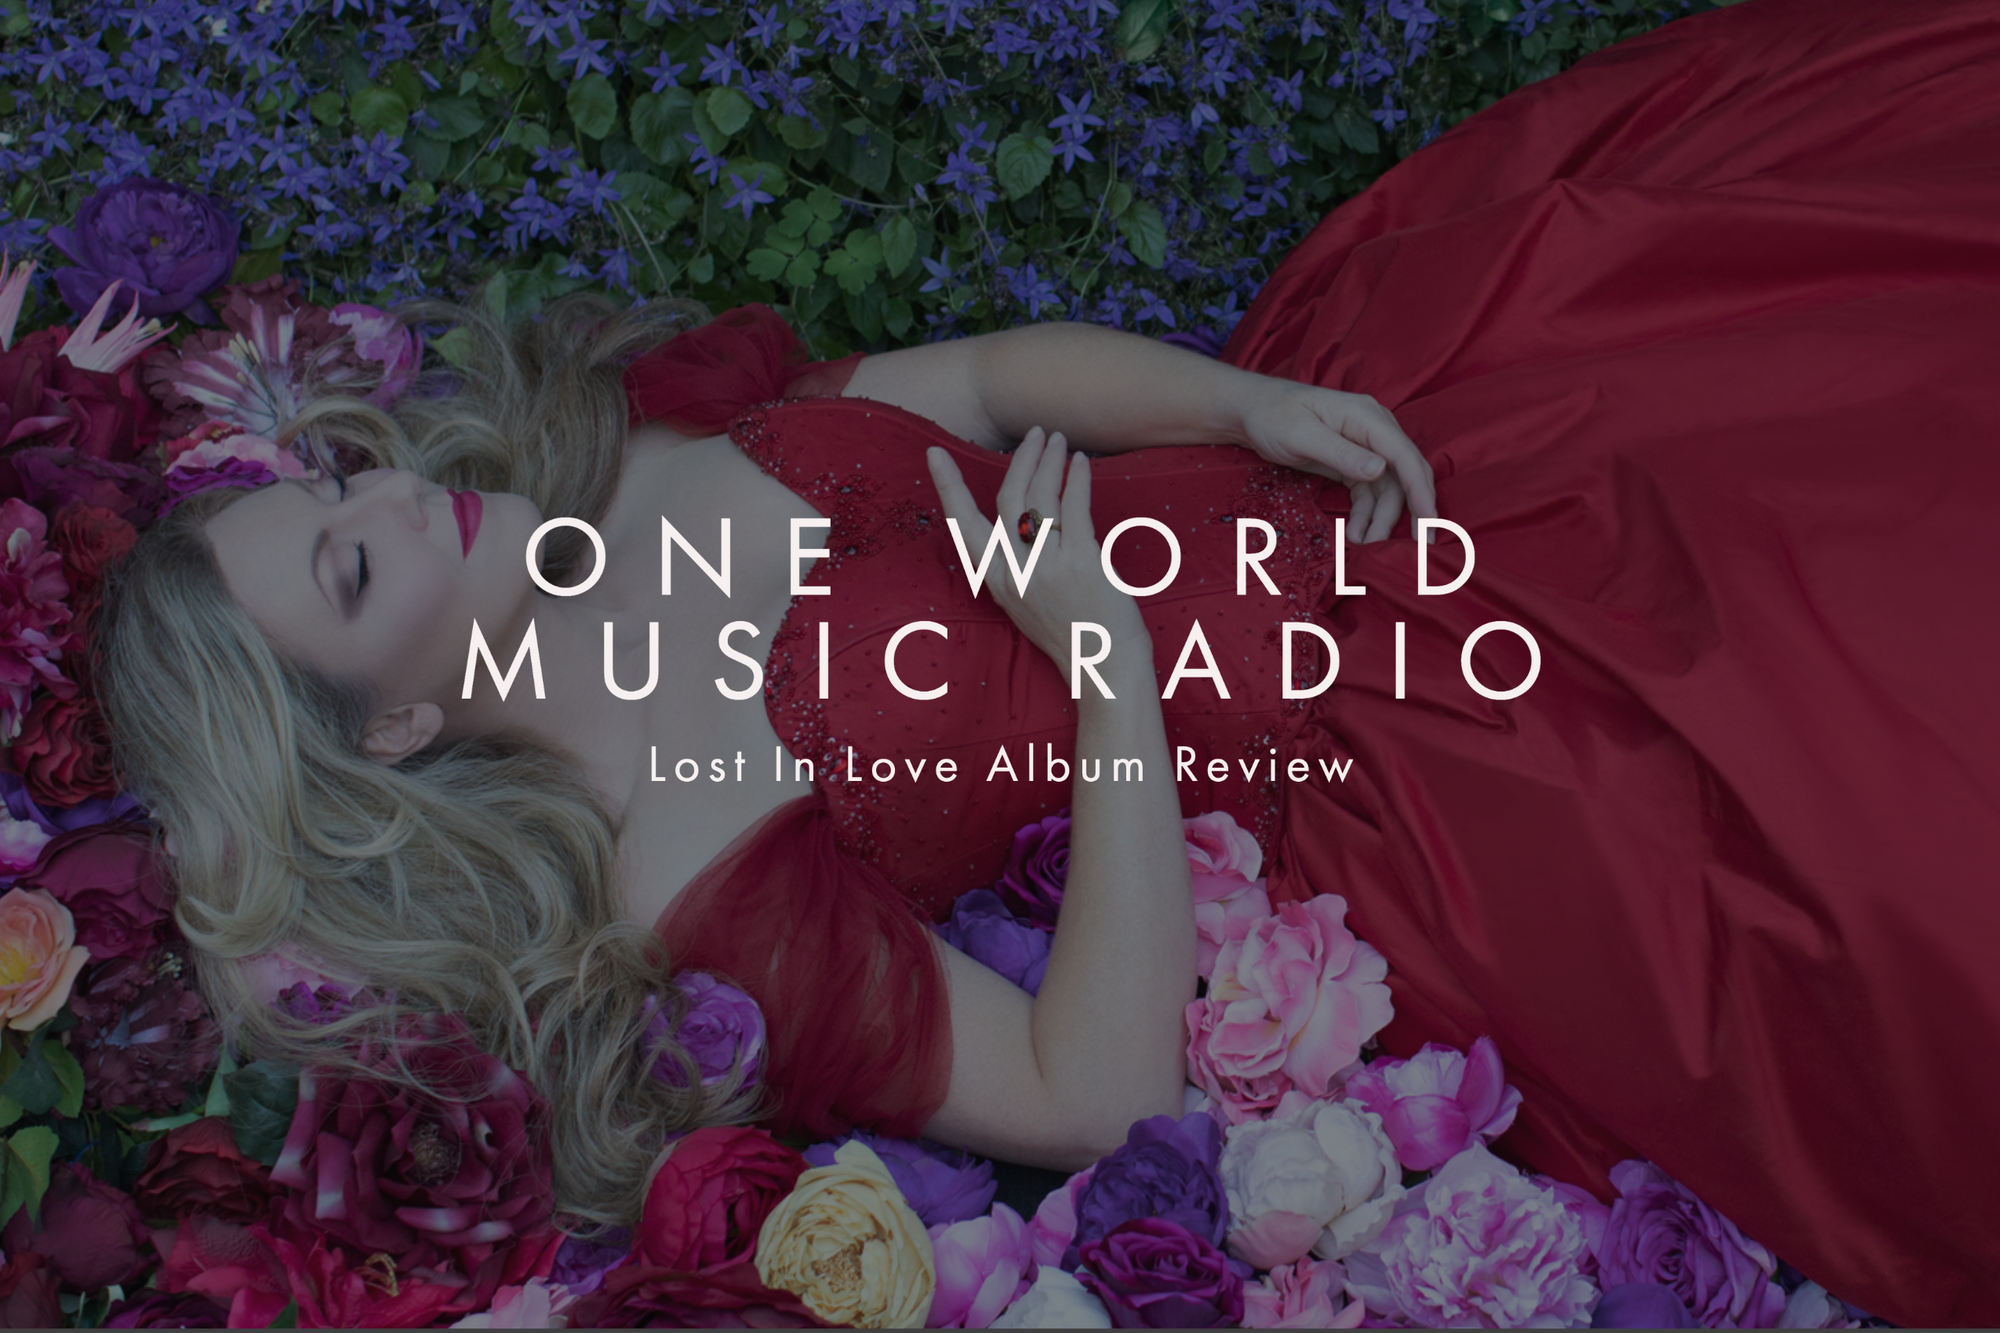 One World Music Radio 'Lost In Love' Album Review